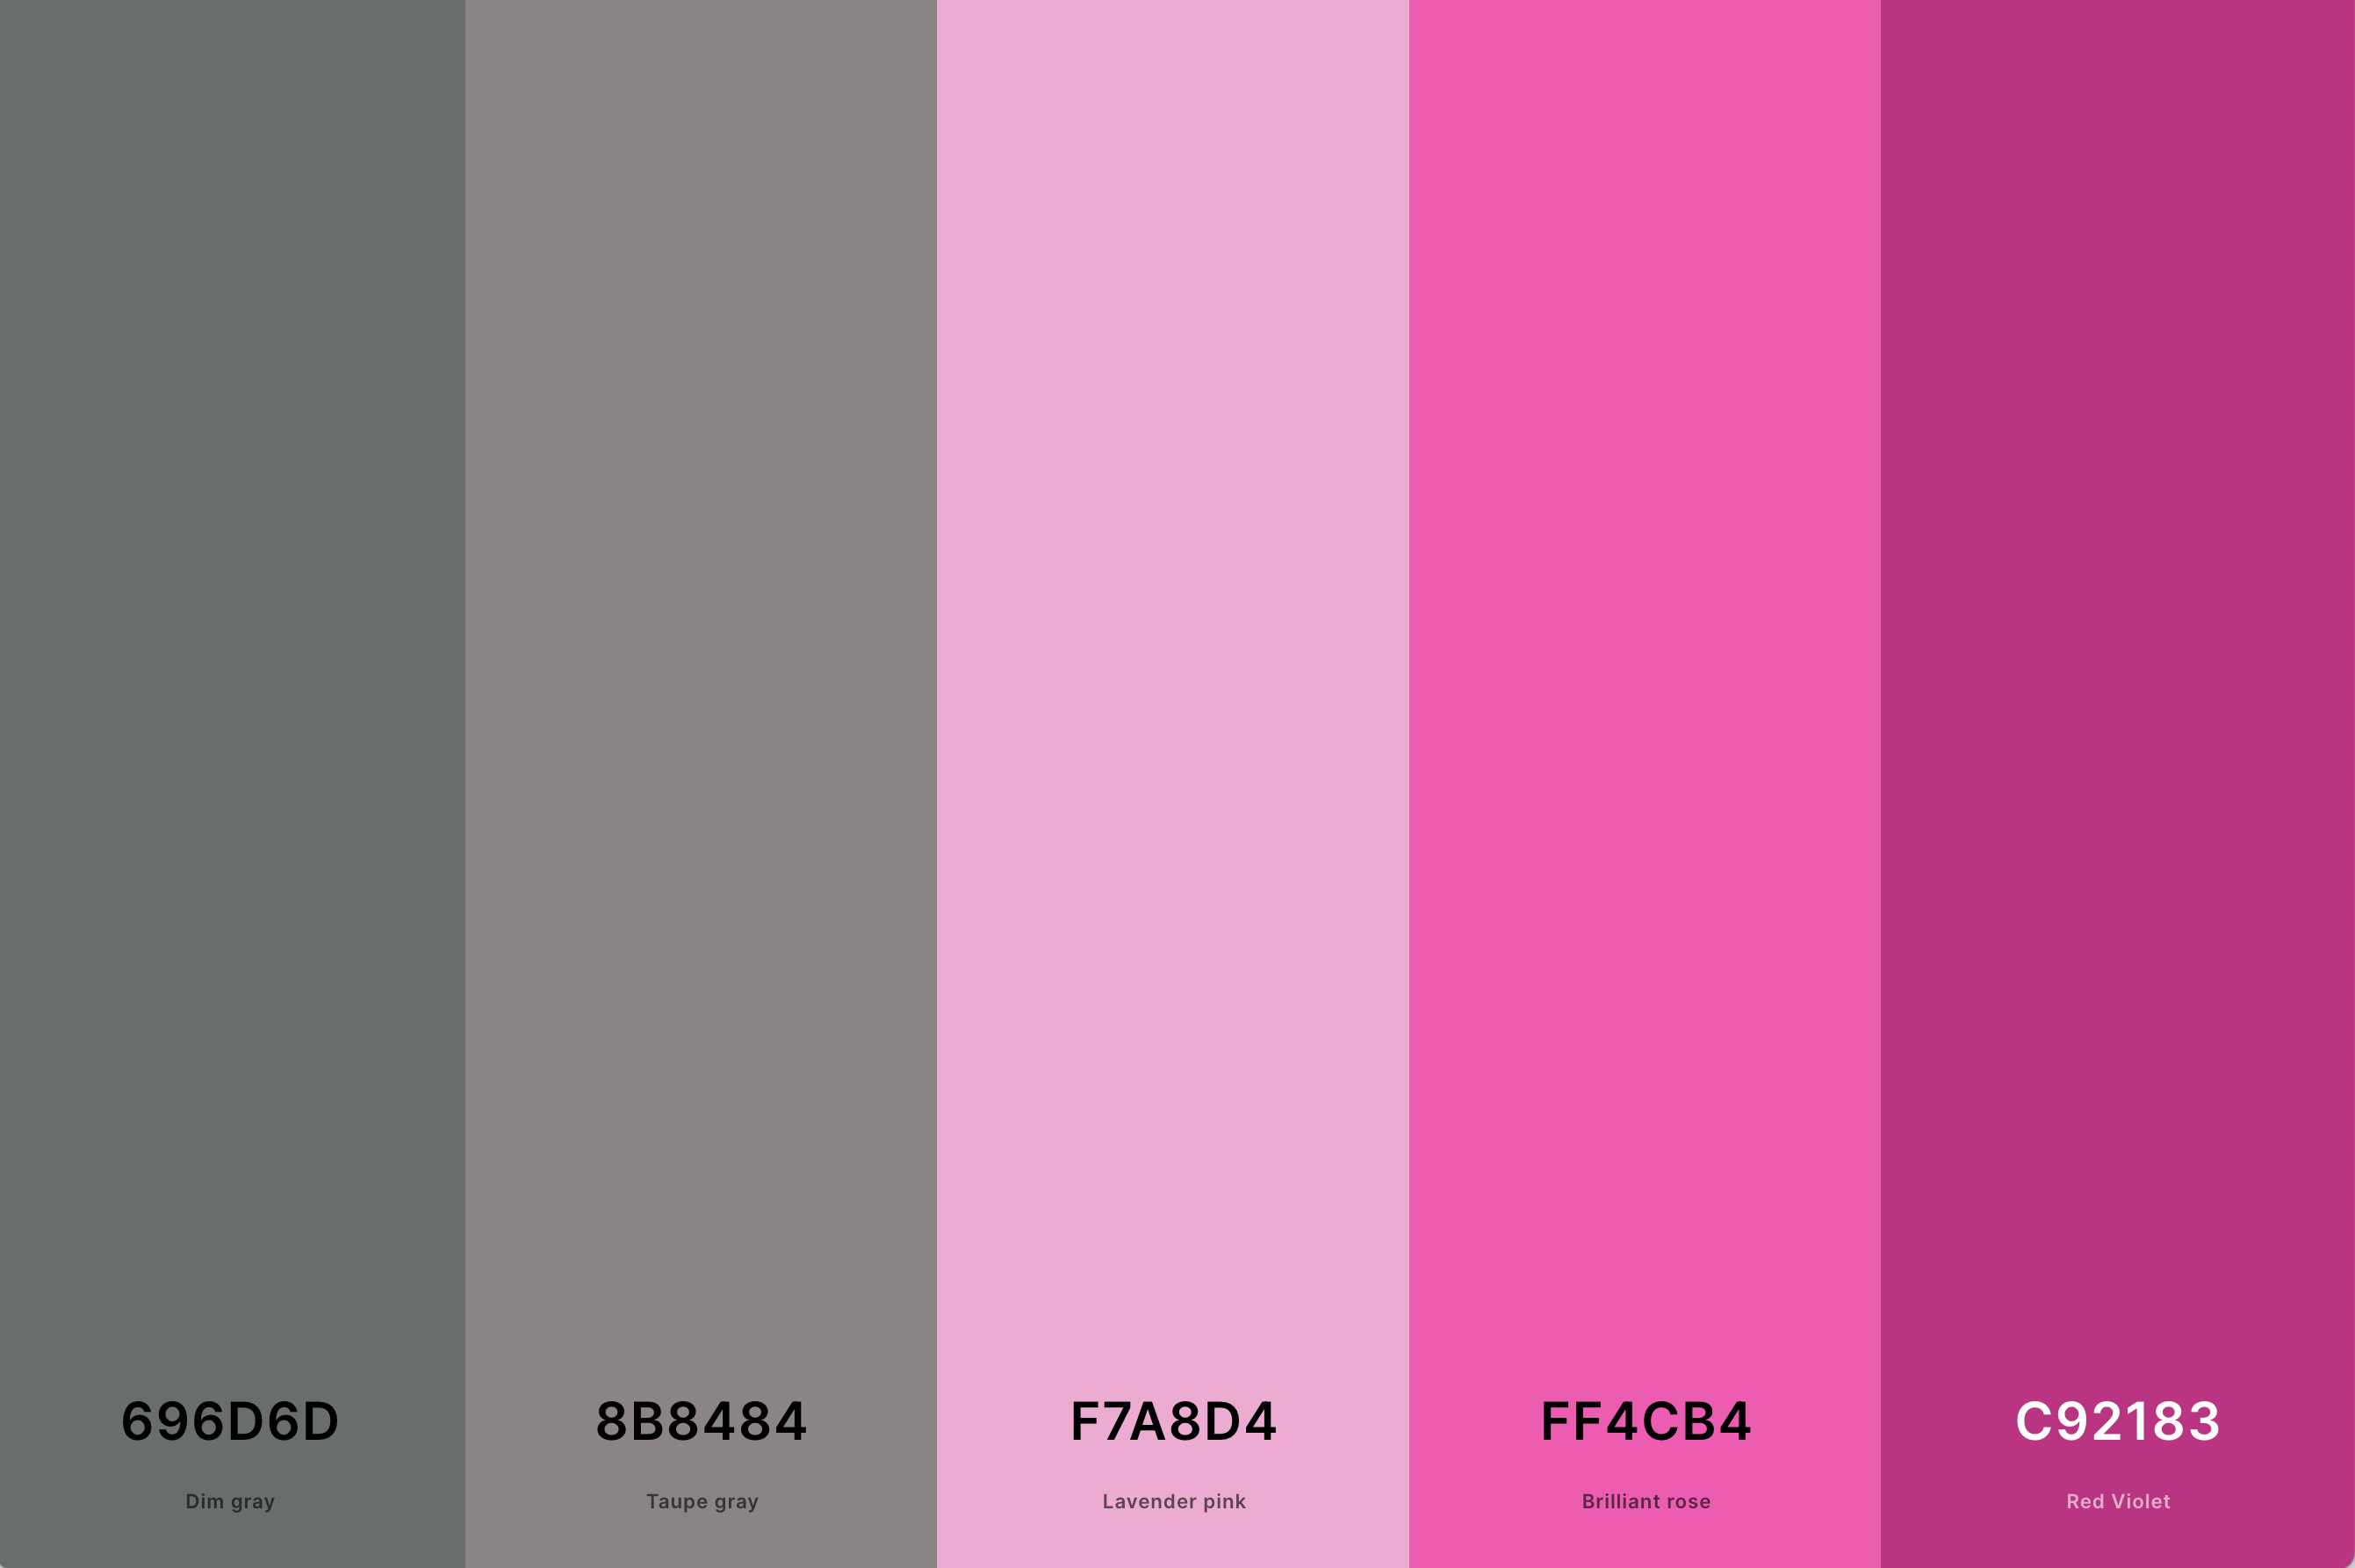 26. Pink And Grey Color Palette Color Palette with Dim Gray (Hex #696D6D) + Taupe Gray (Hex #8B8484) + Lavender Pink (Hex #F7A8D4) + Brilliant Rose (Hex #FF4CB4) + Red Violet (Hex #C92183) Color Palette with Hex Codes